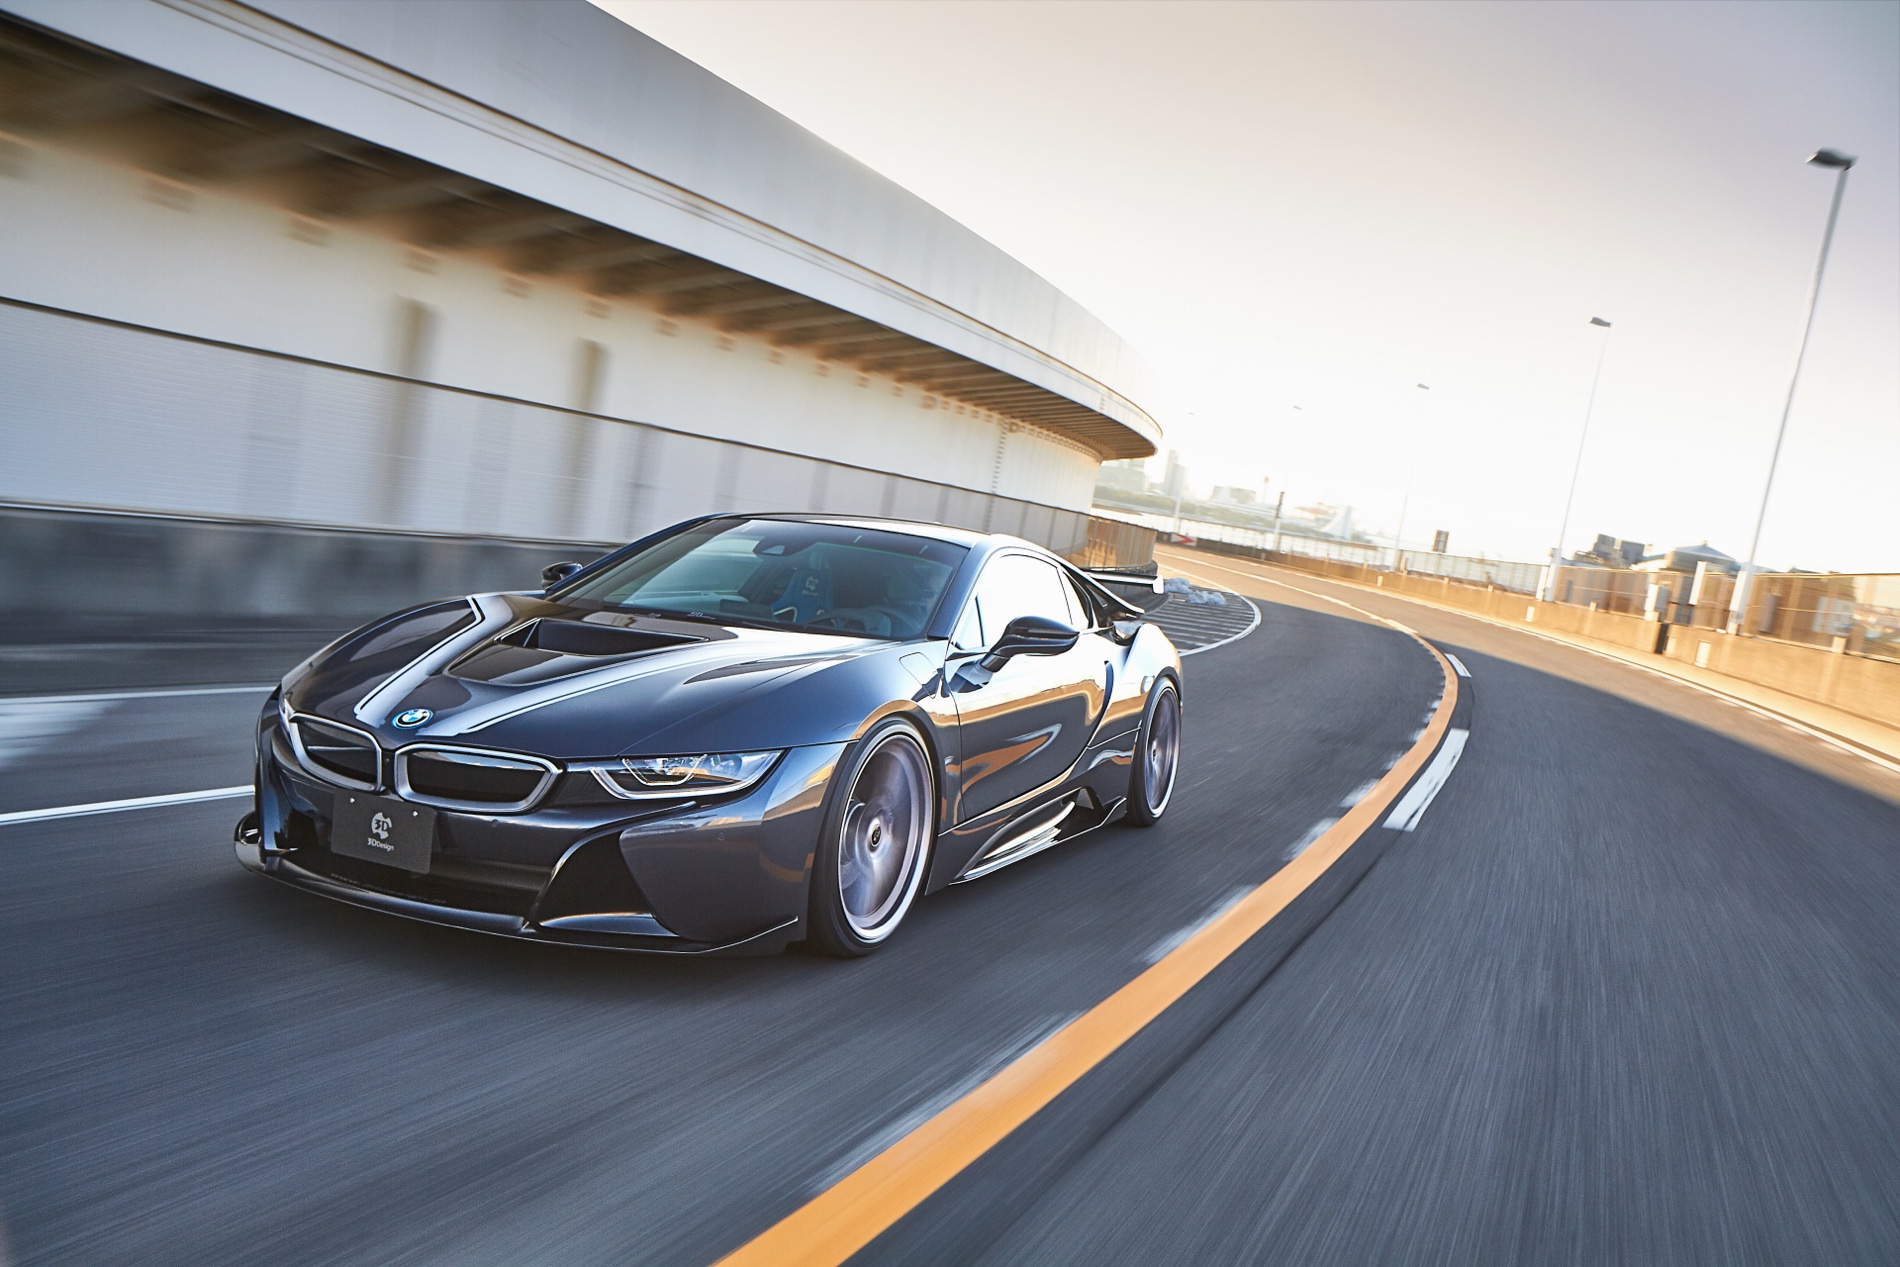 Interview with ALPINA CEO: How the ALPINA BMW i8 Almost Happened and Why it Didn’t